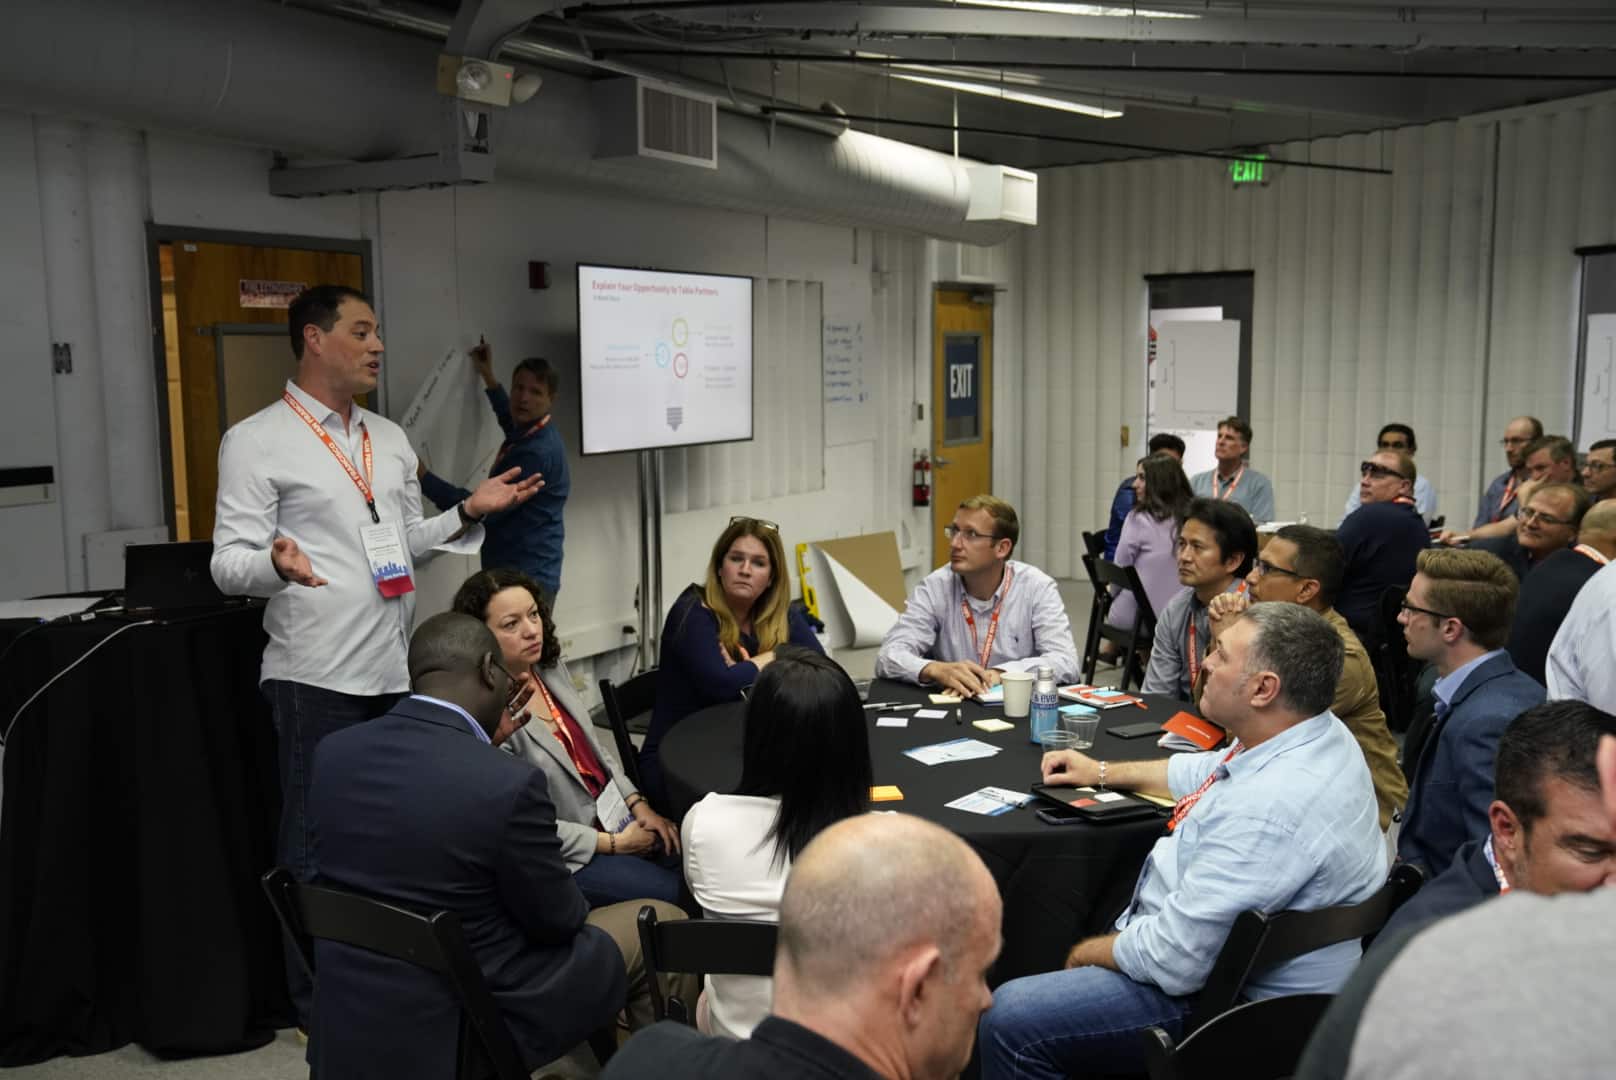 Ralph Morales III leading a workshop at the Lean Startup Conference